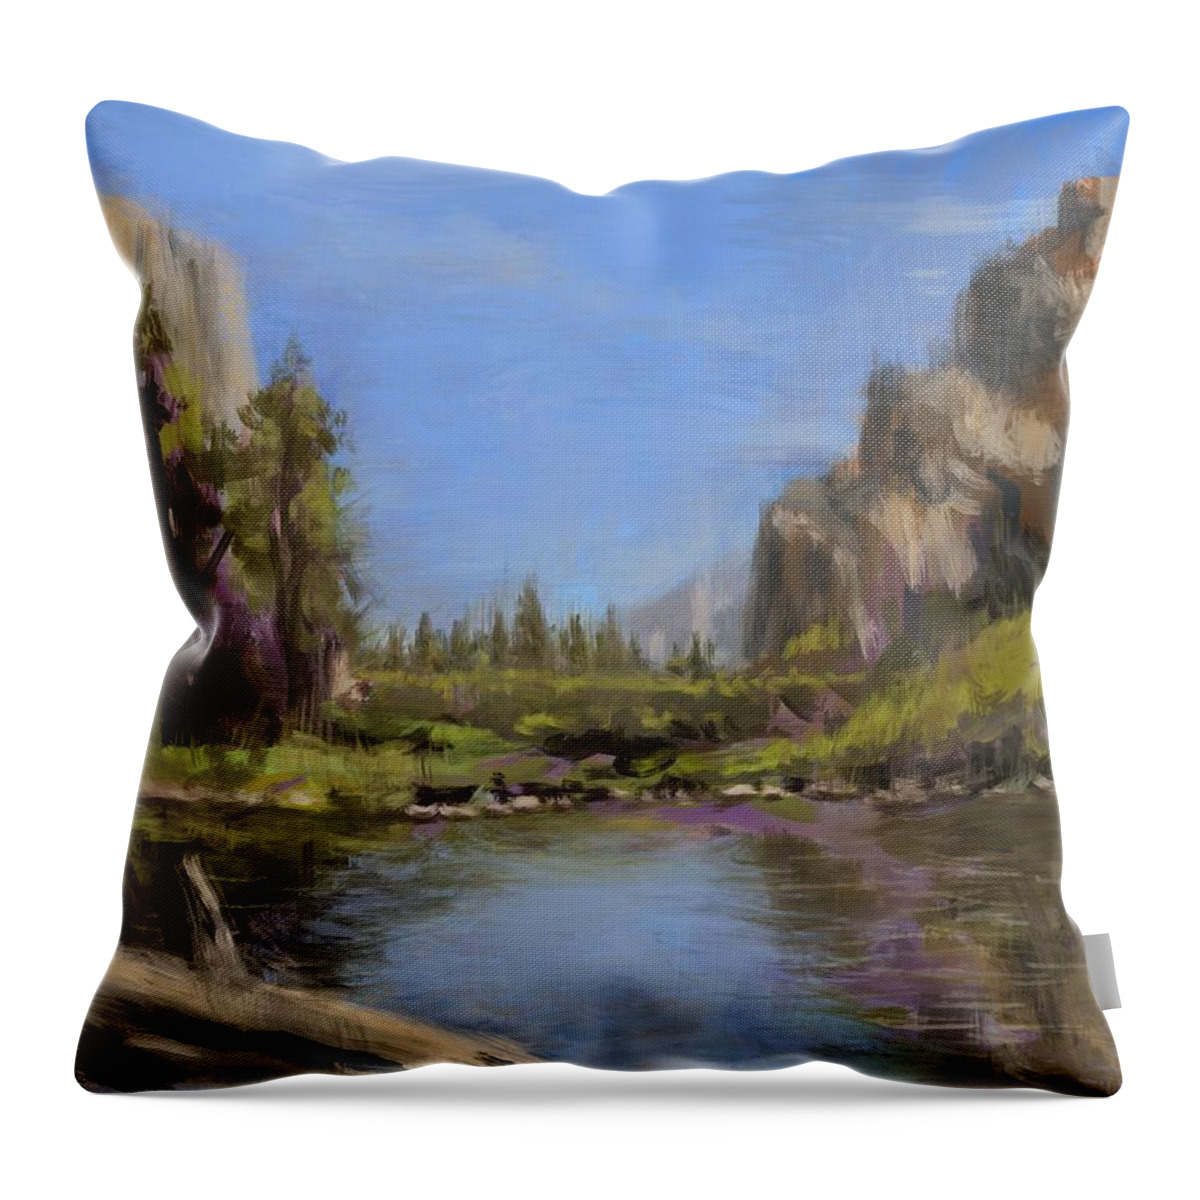 Landscape Throw Pillow featuring the painting Reflections by Larry Whitler